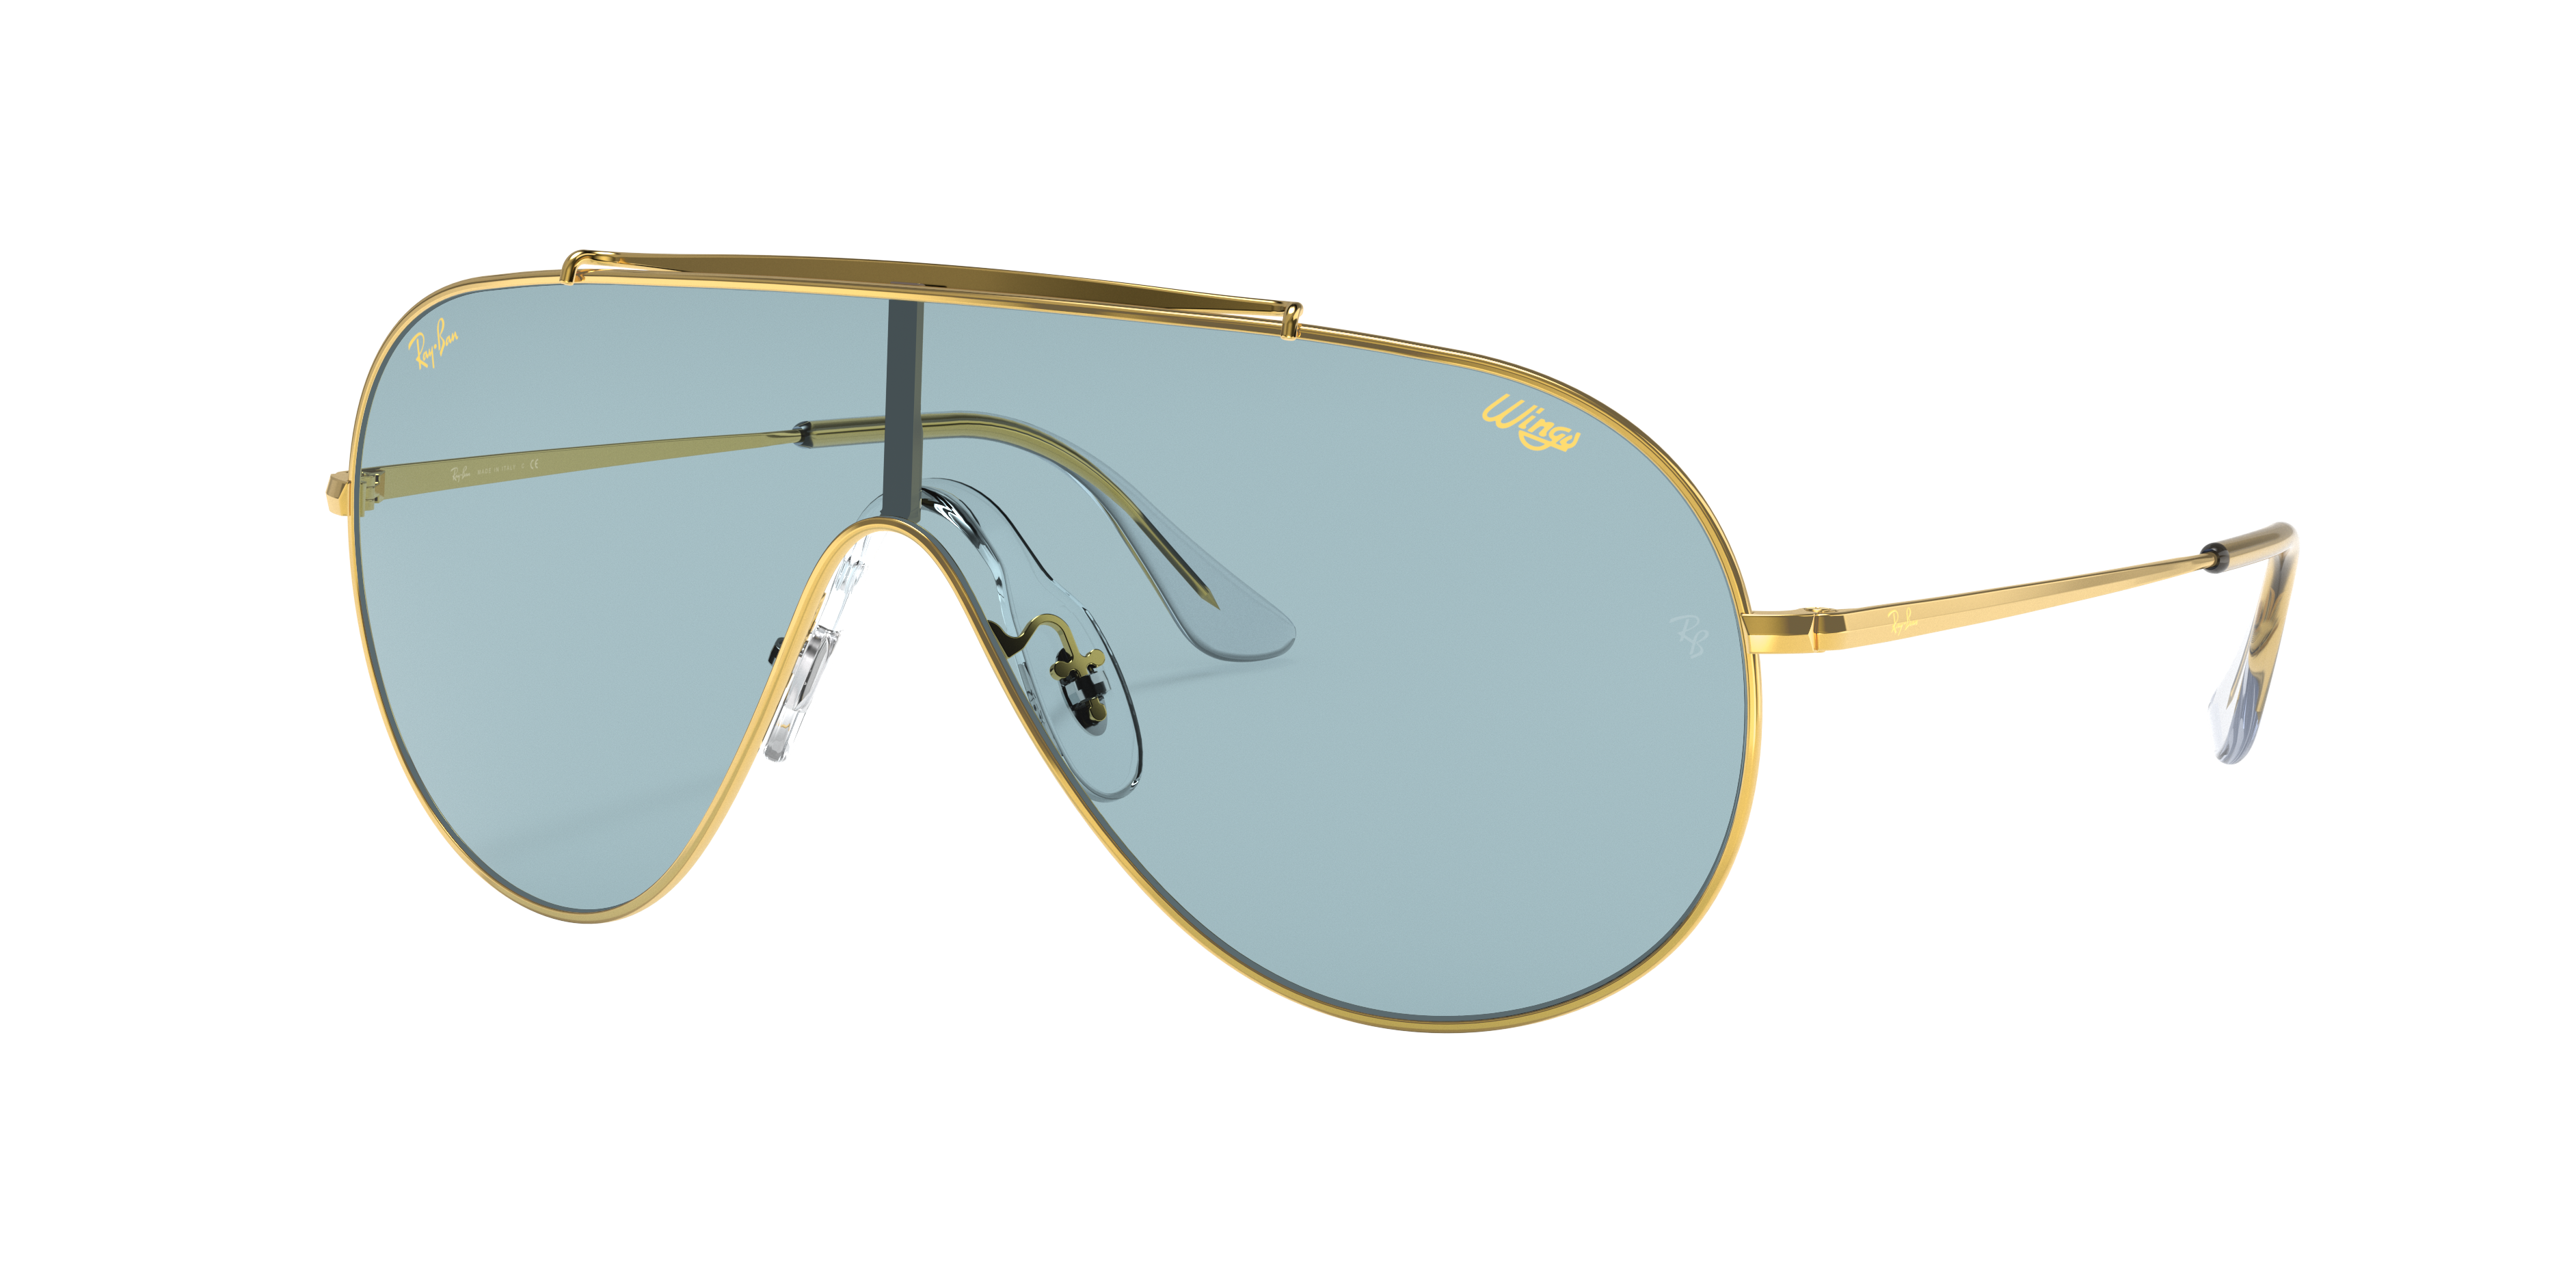 ray ban wings blue